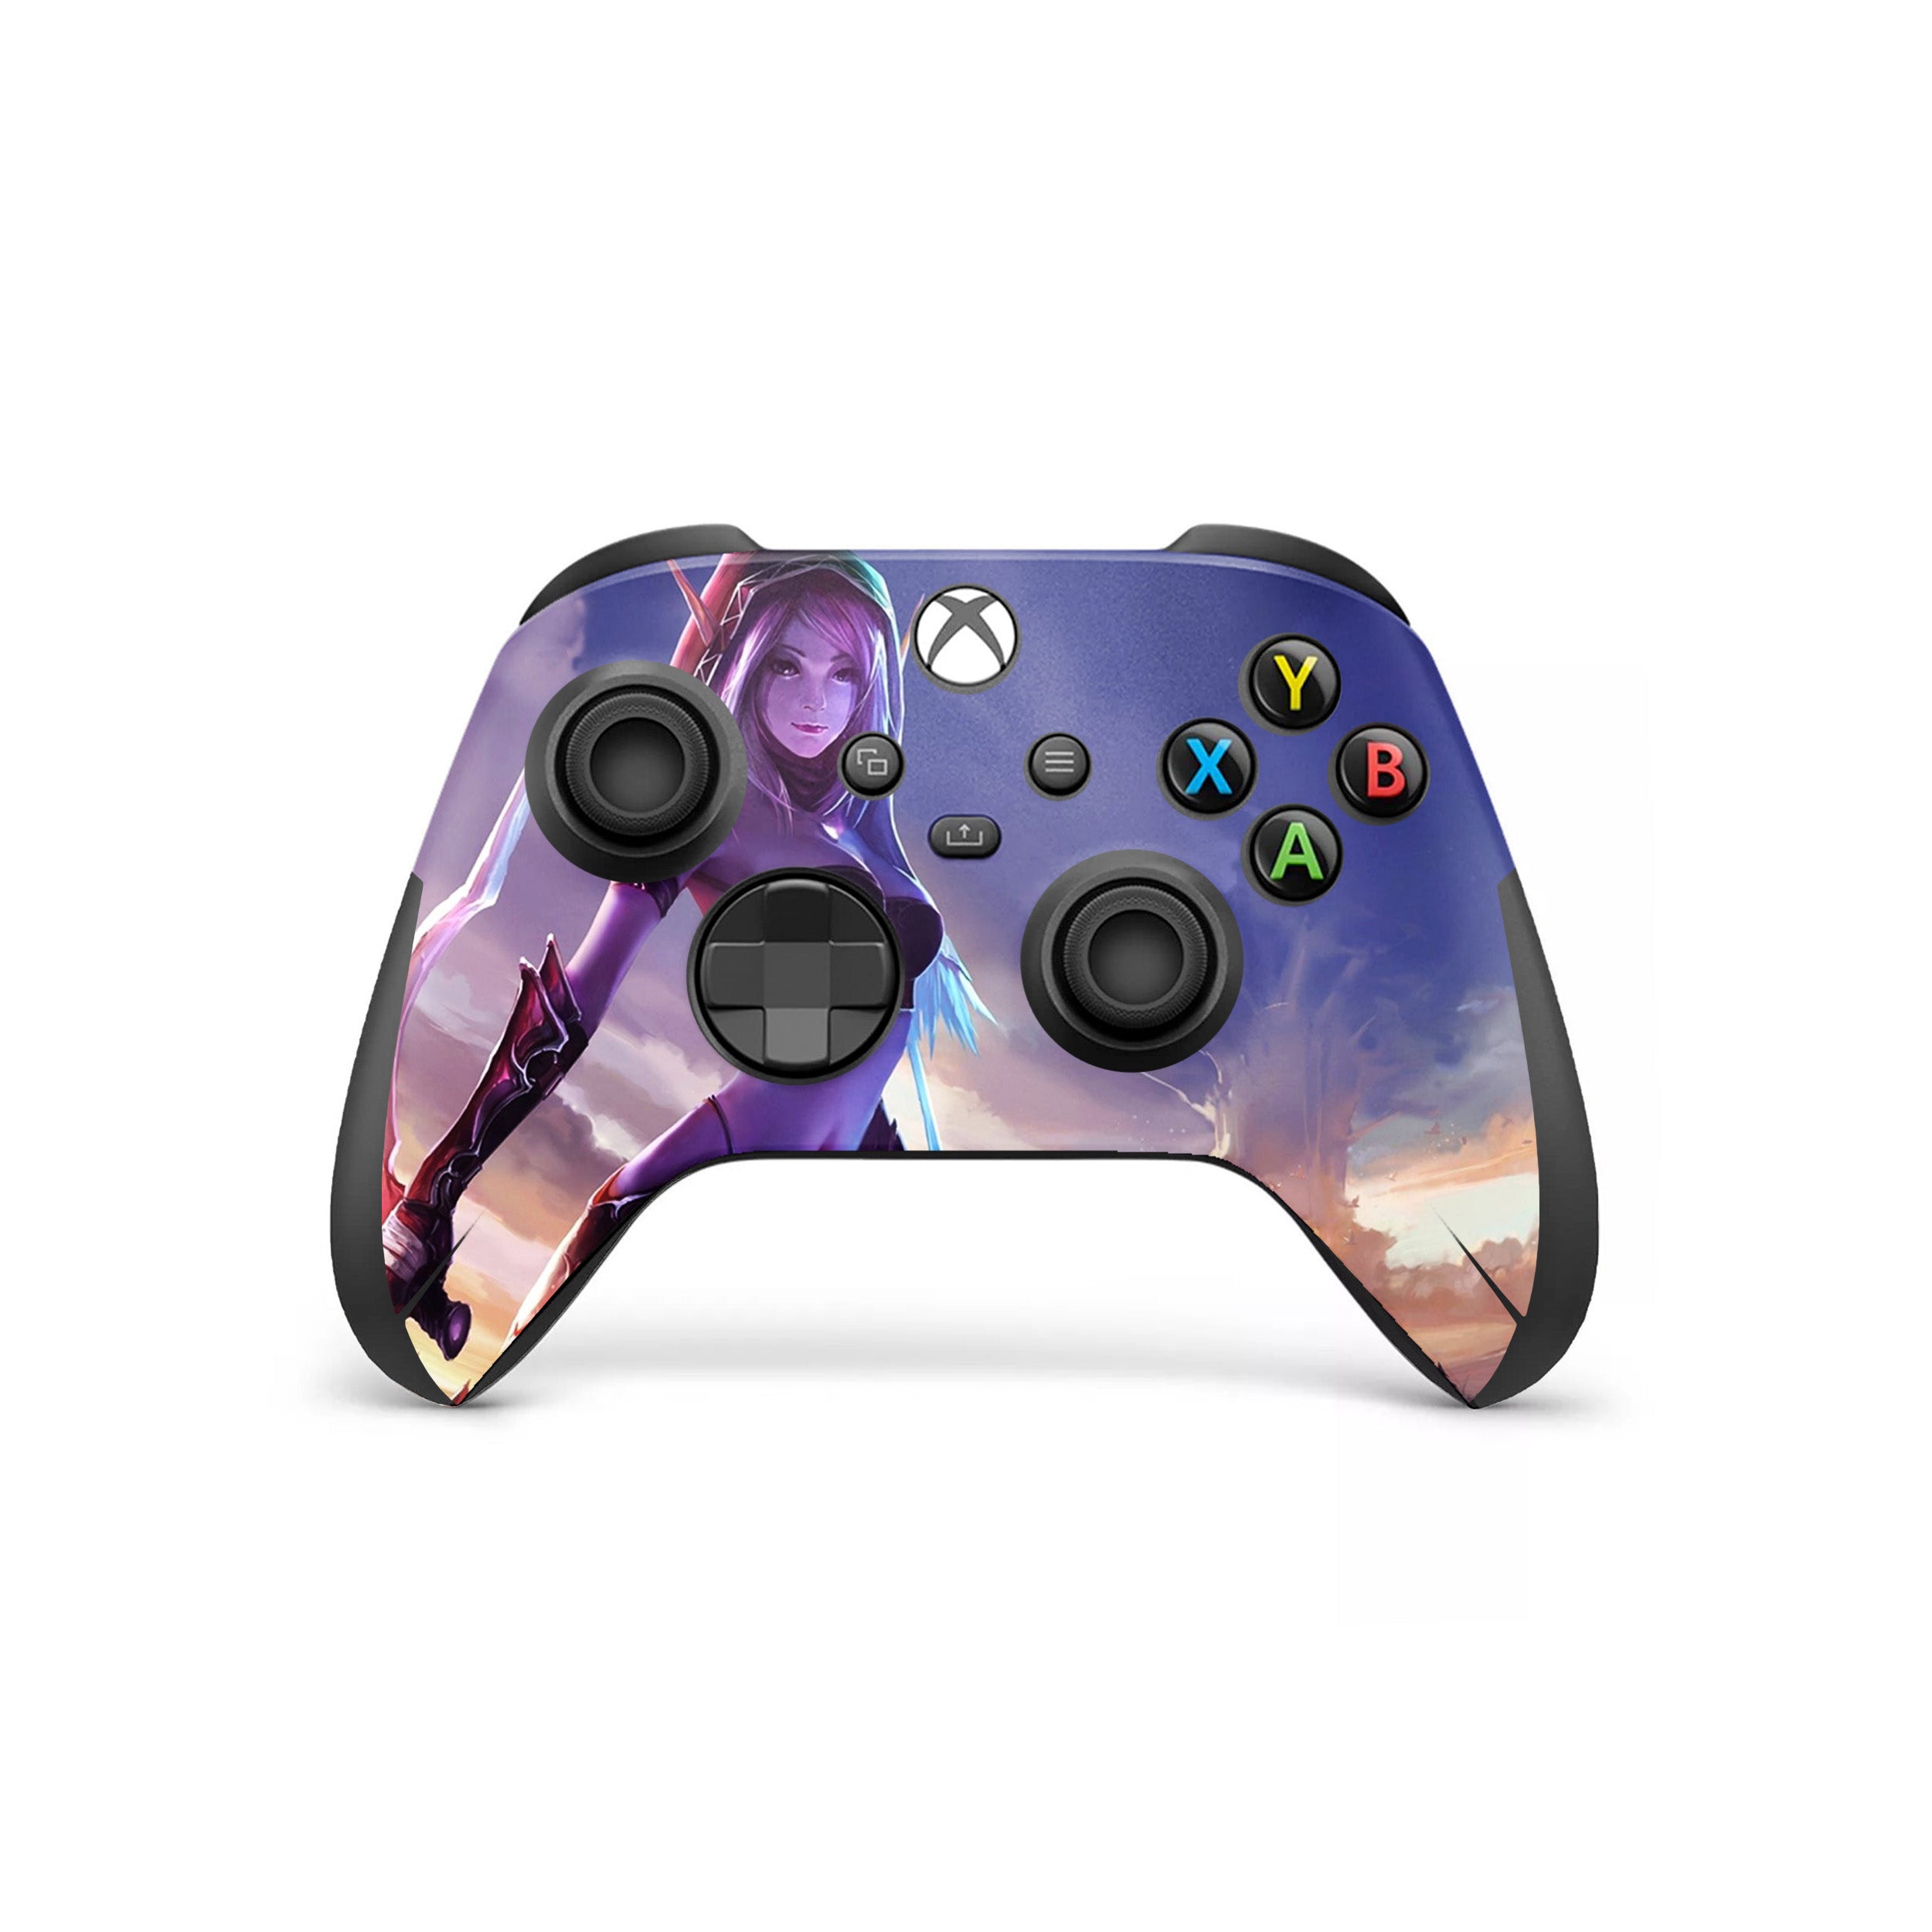 A video game skin featuring a World of Warcraft design for the Xbox Wireless Controller.